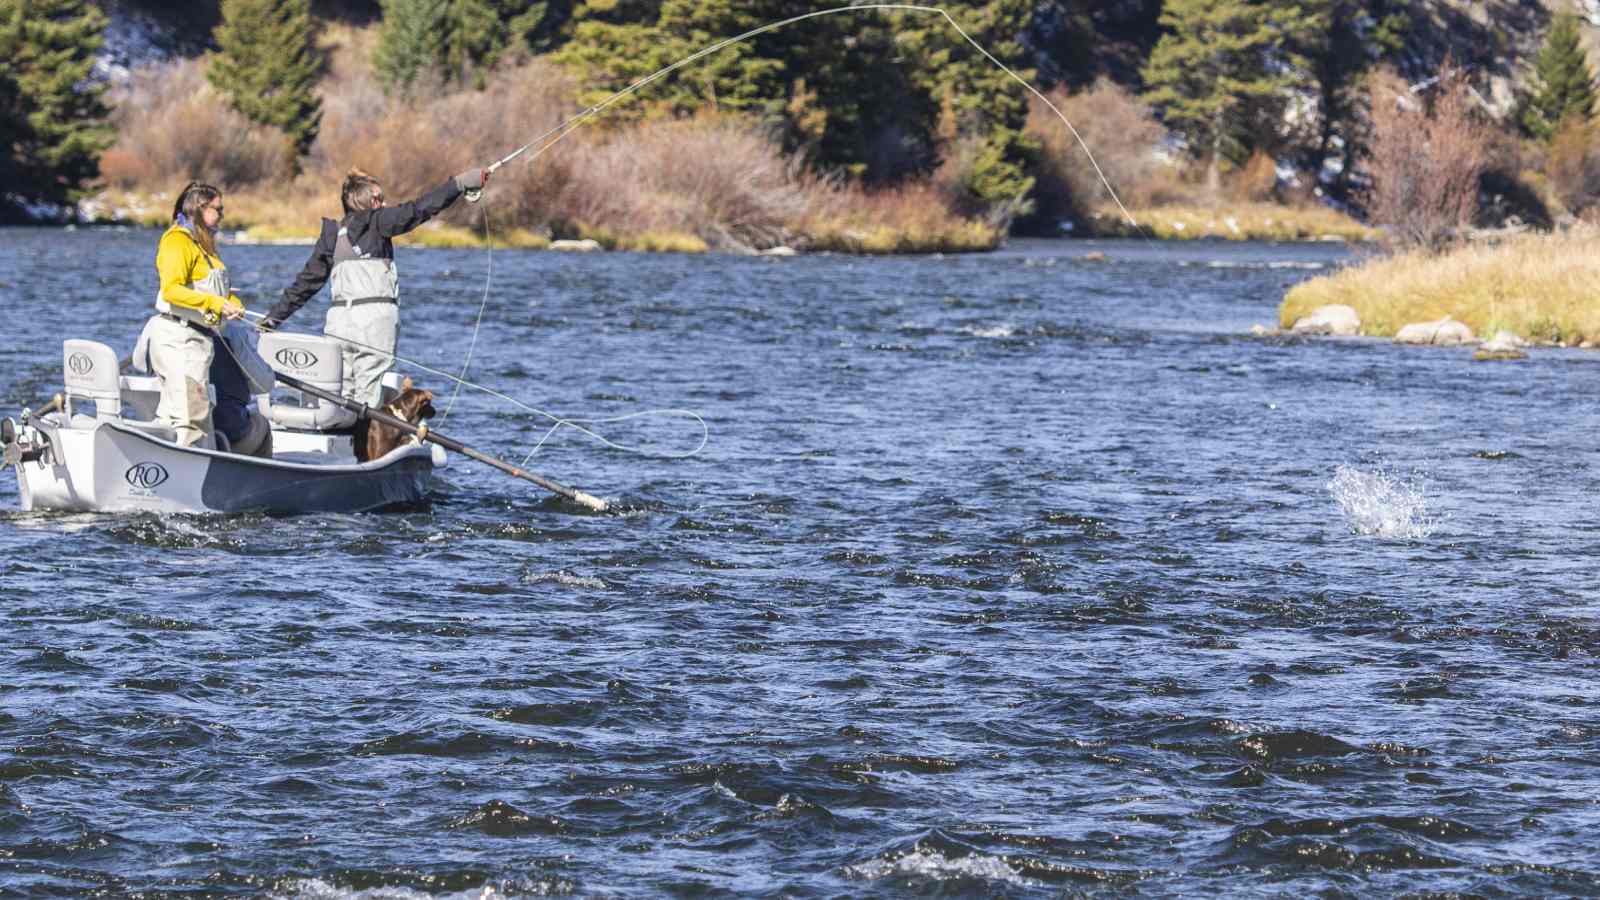 Two women stand in a boat while fly fishing as a guide steers them downriver during a trip with The Tackle Shop.